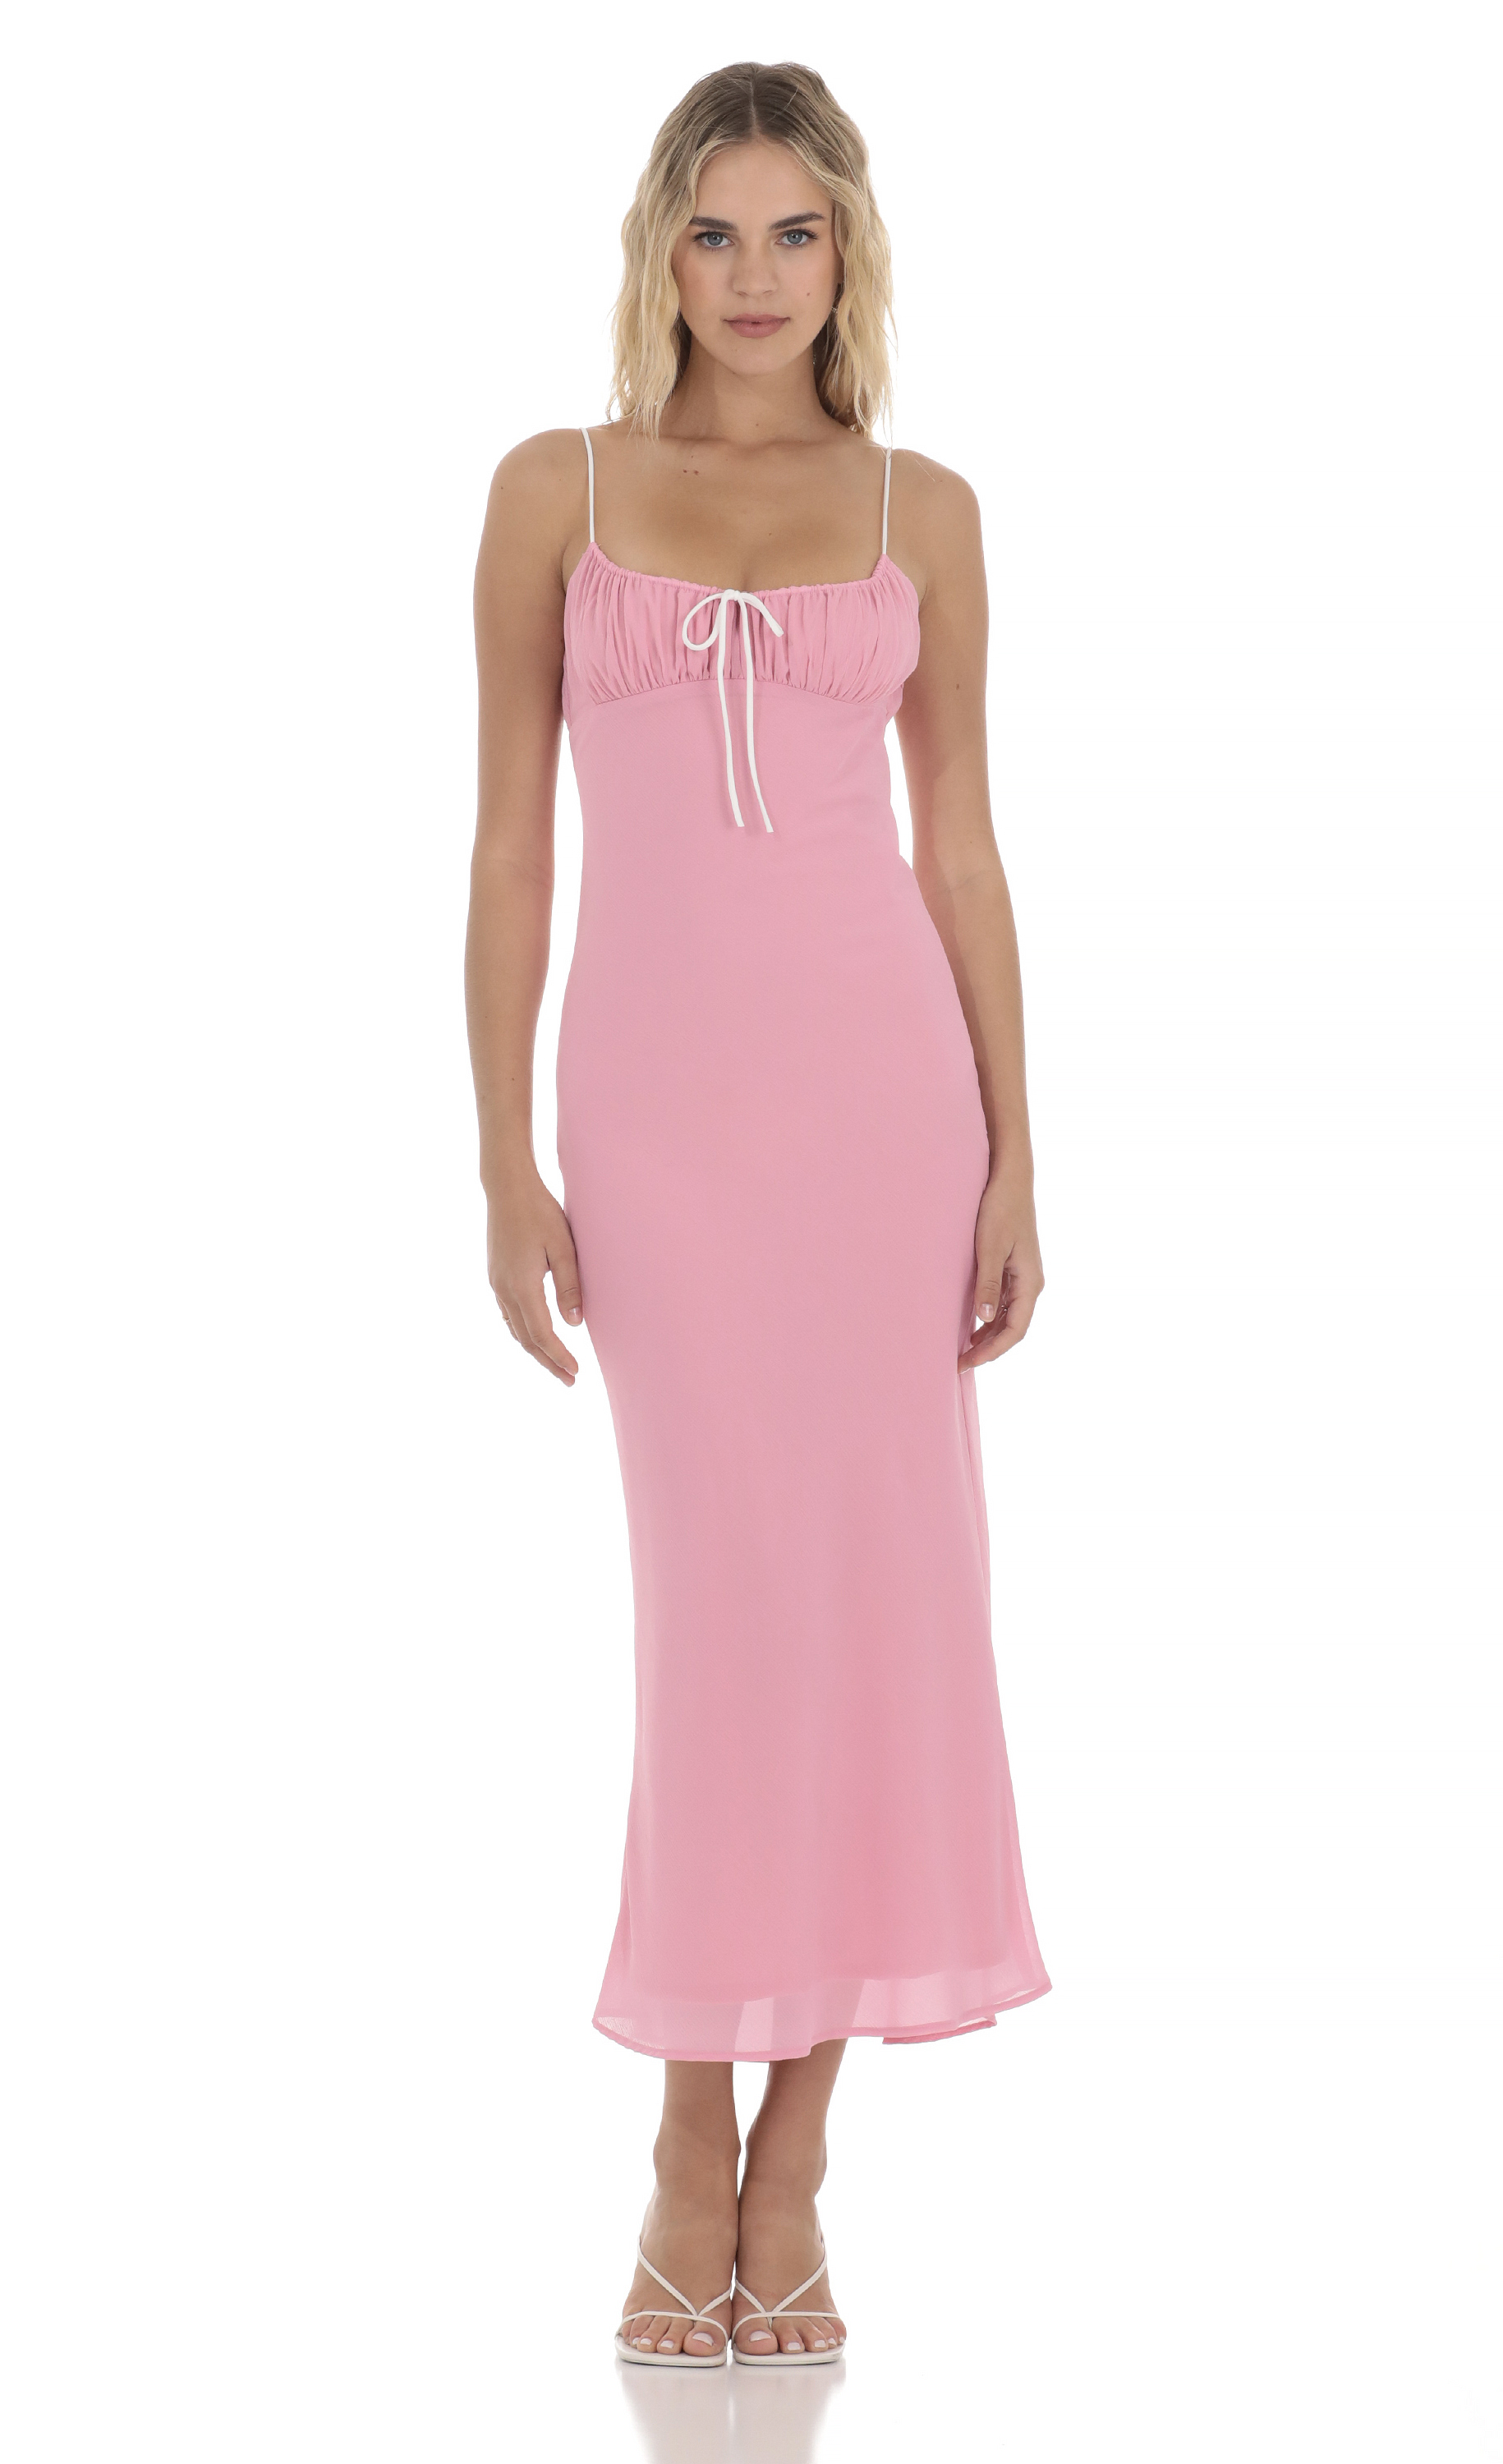 Ruched Bust Midi Dress in Pink